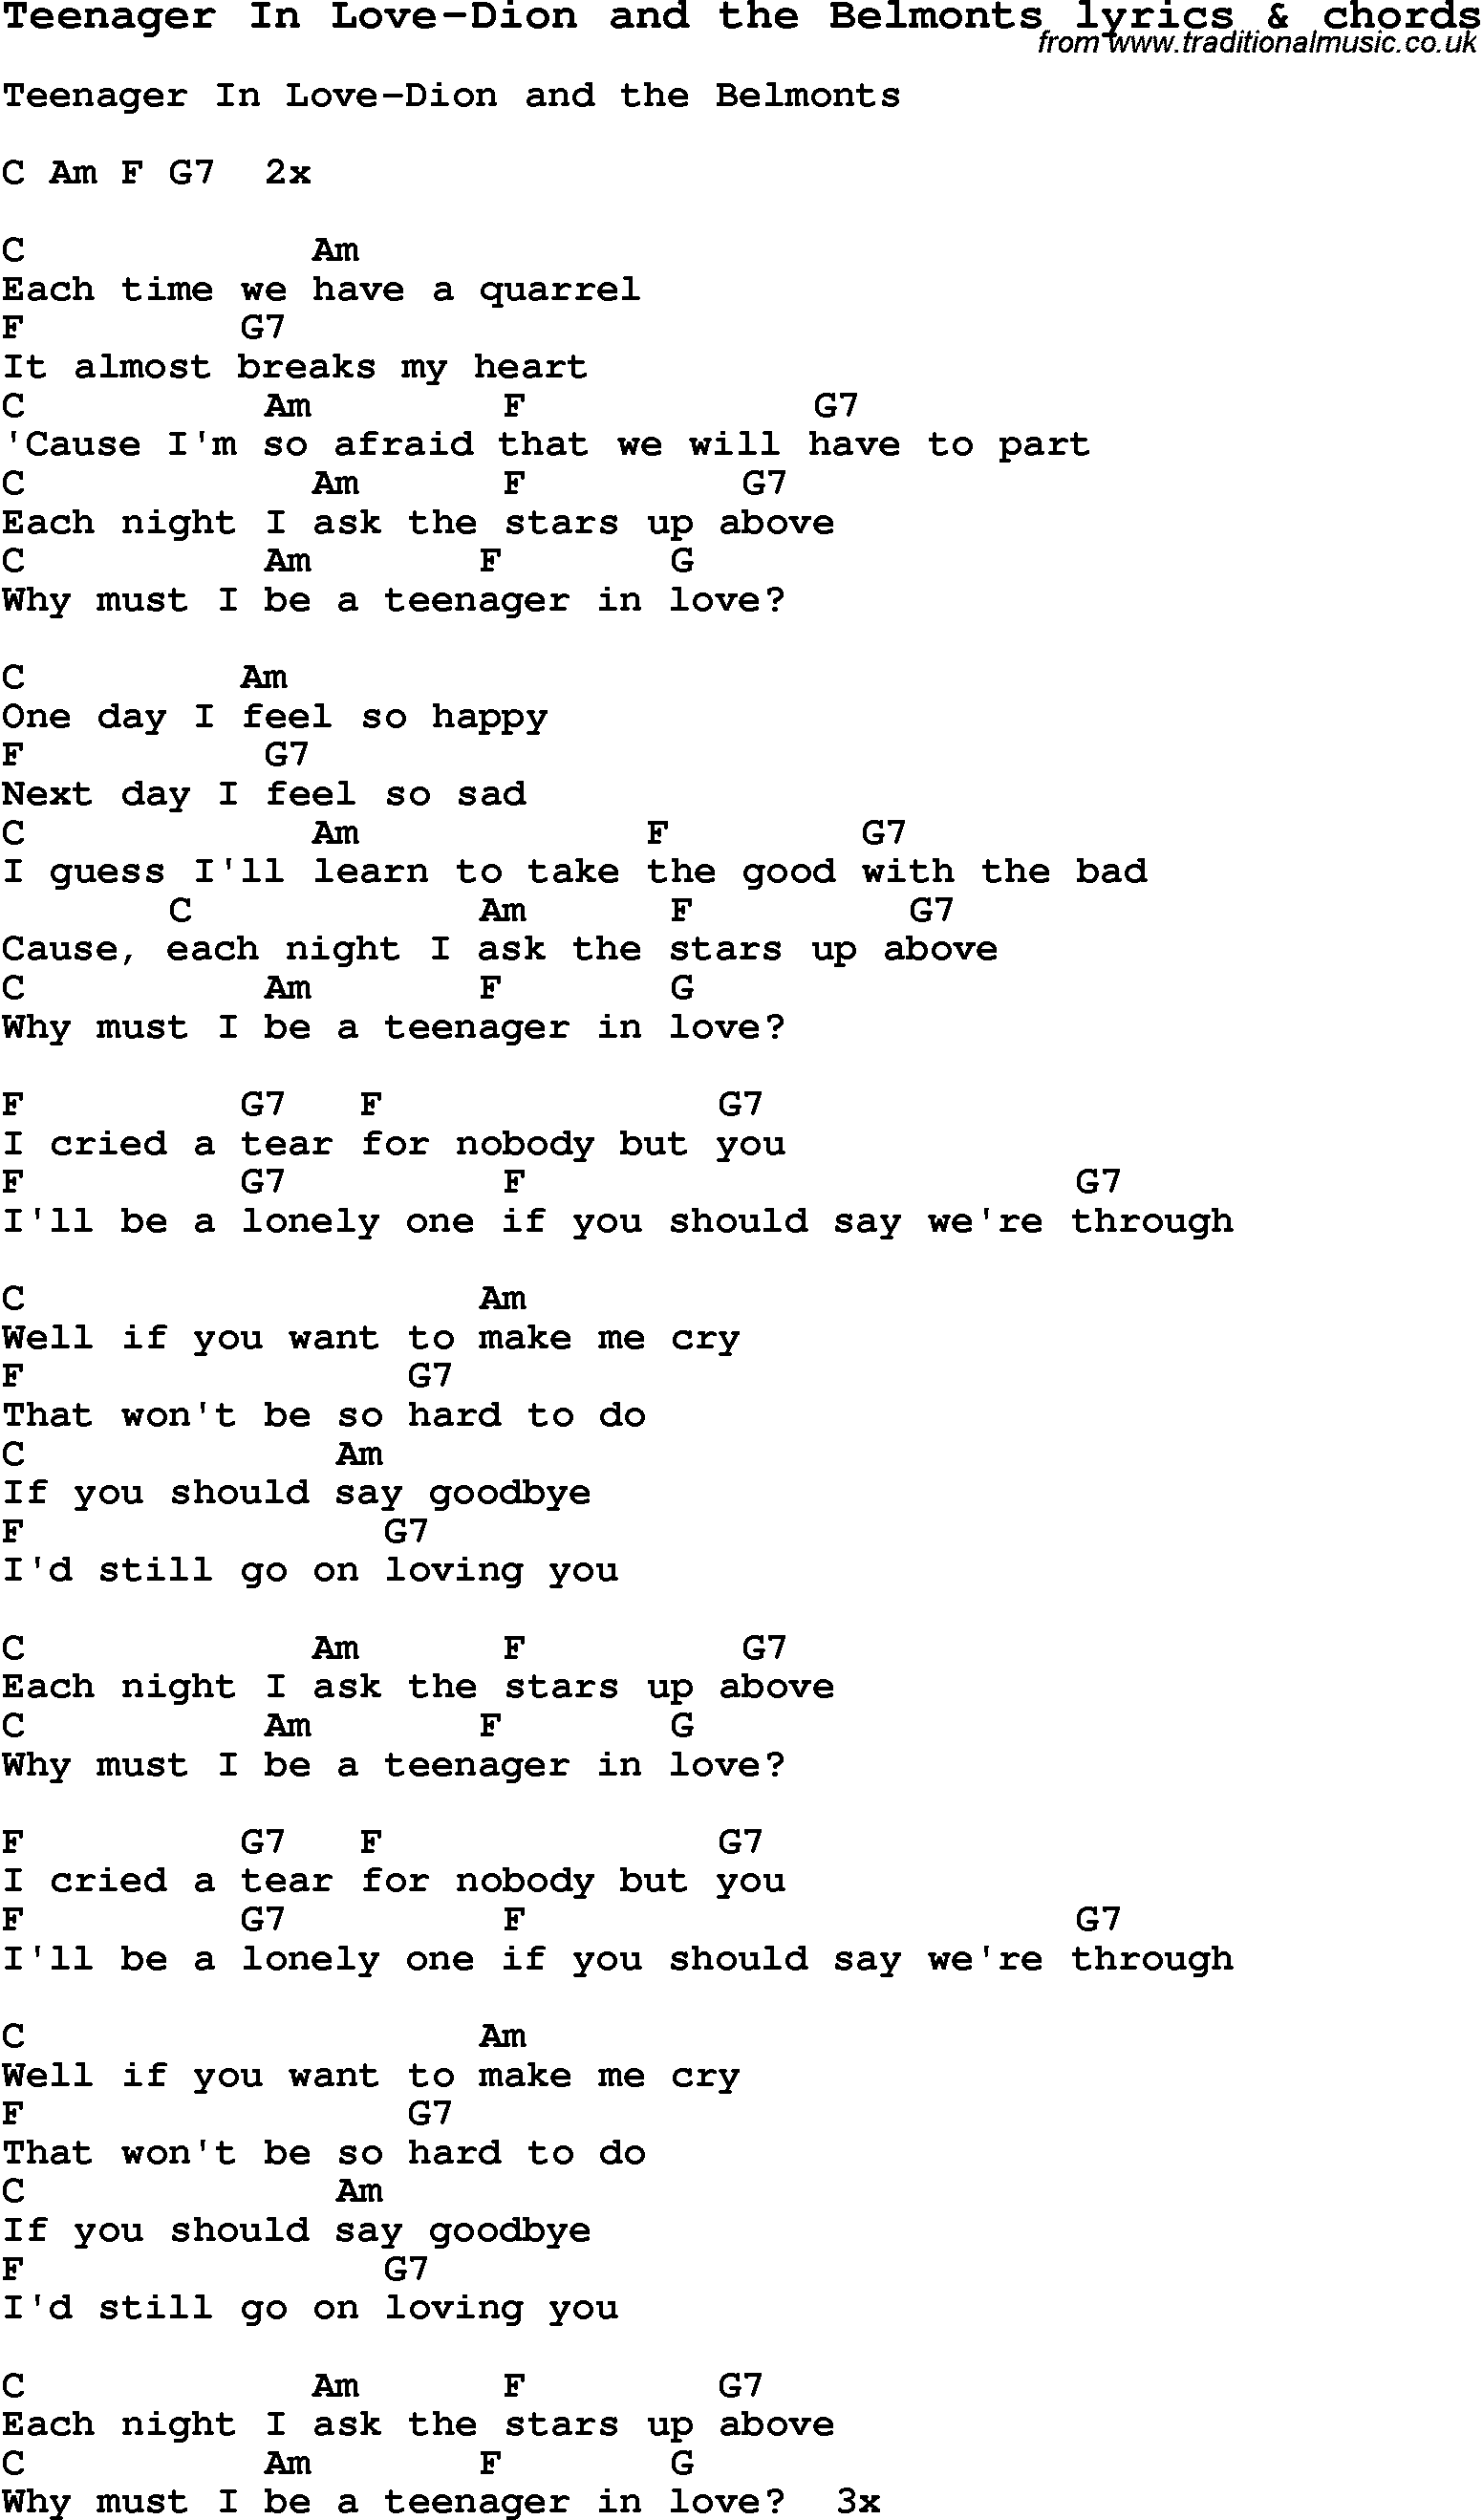 Love Song Lyrics for: Teenager In Love-Dion and the Belmonts with chords for Ukulele, Guitar Banjo etc.